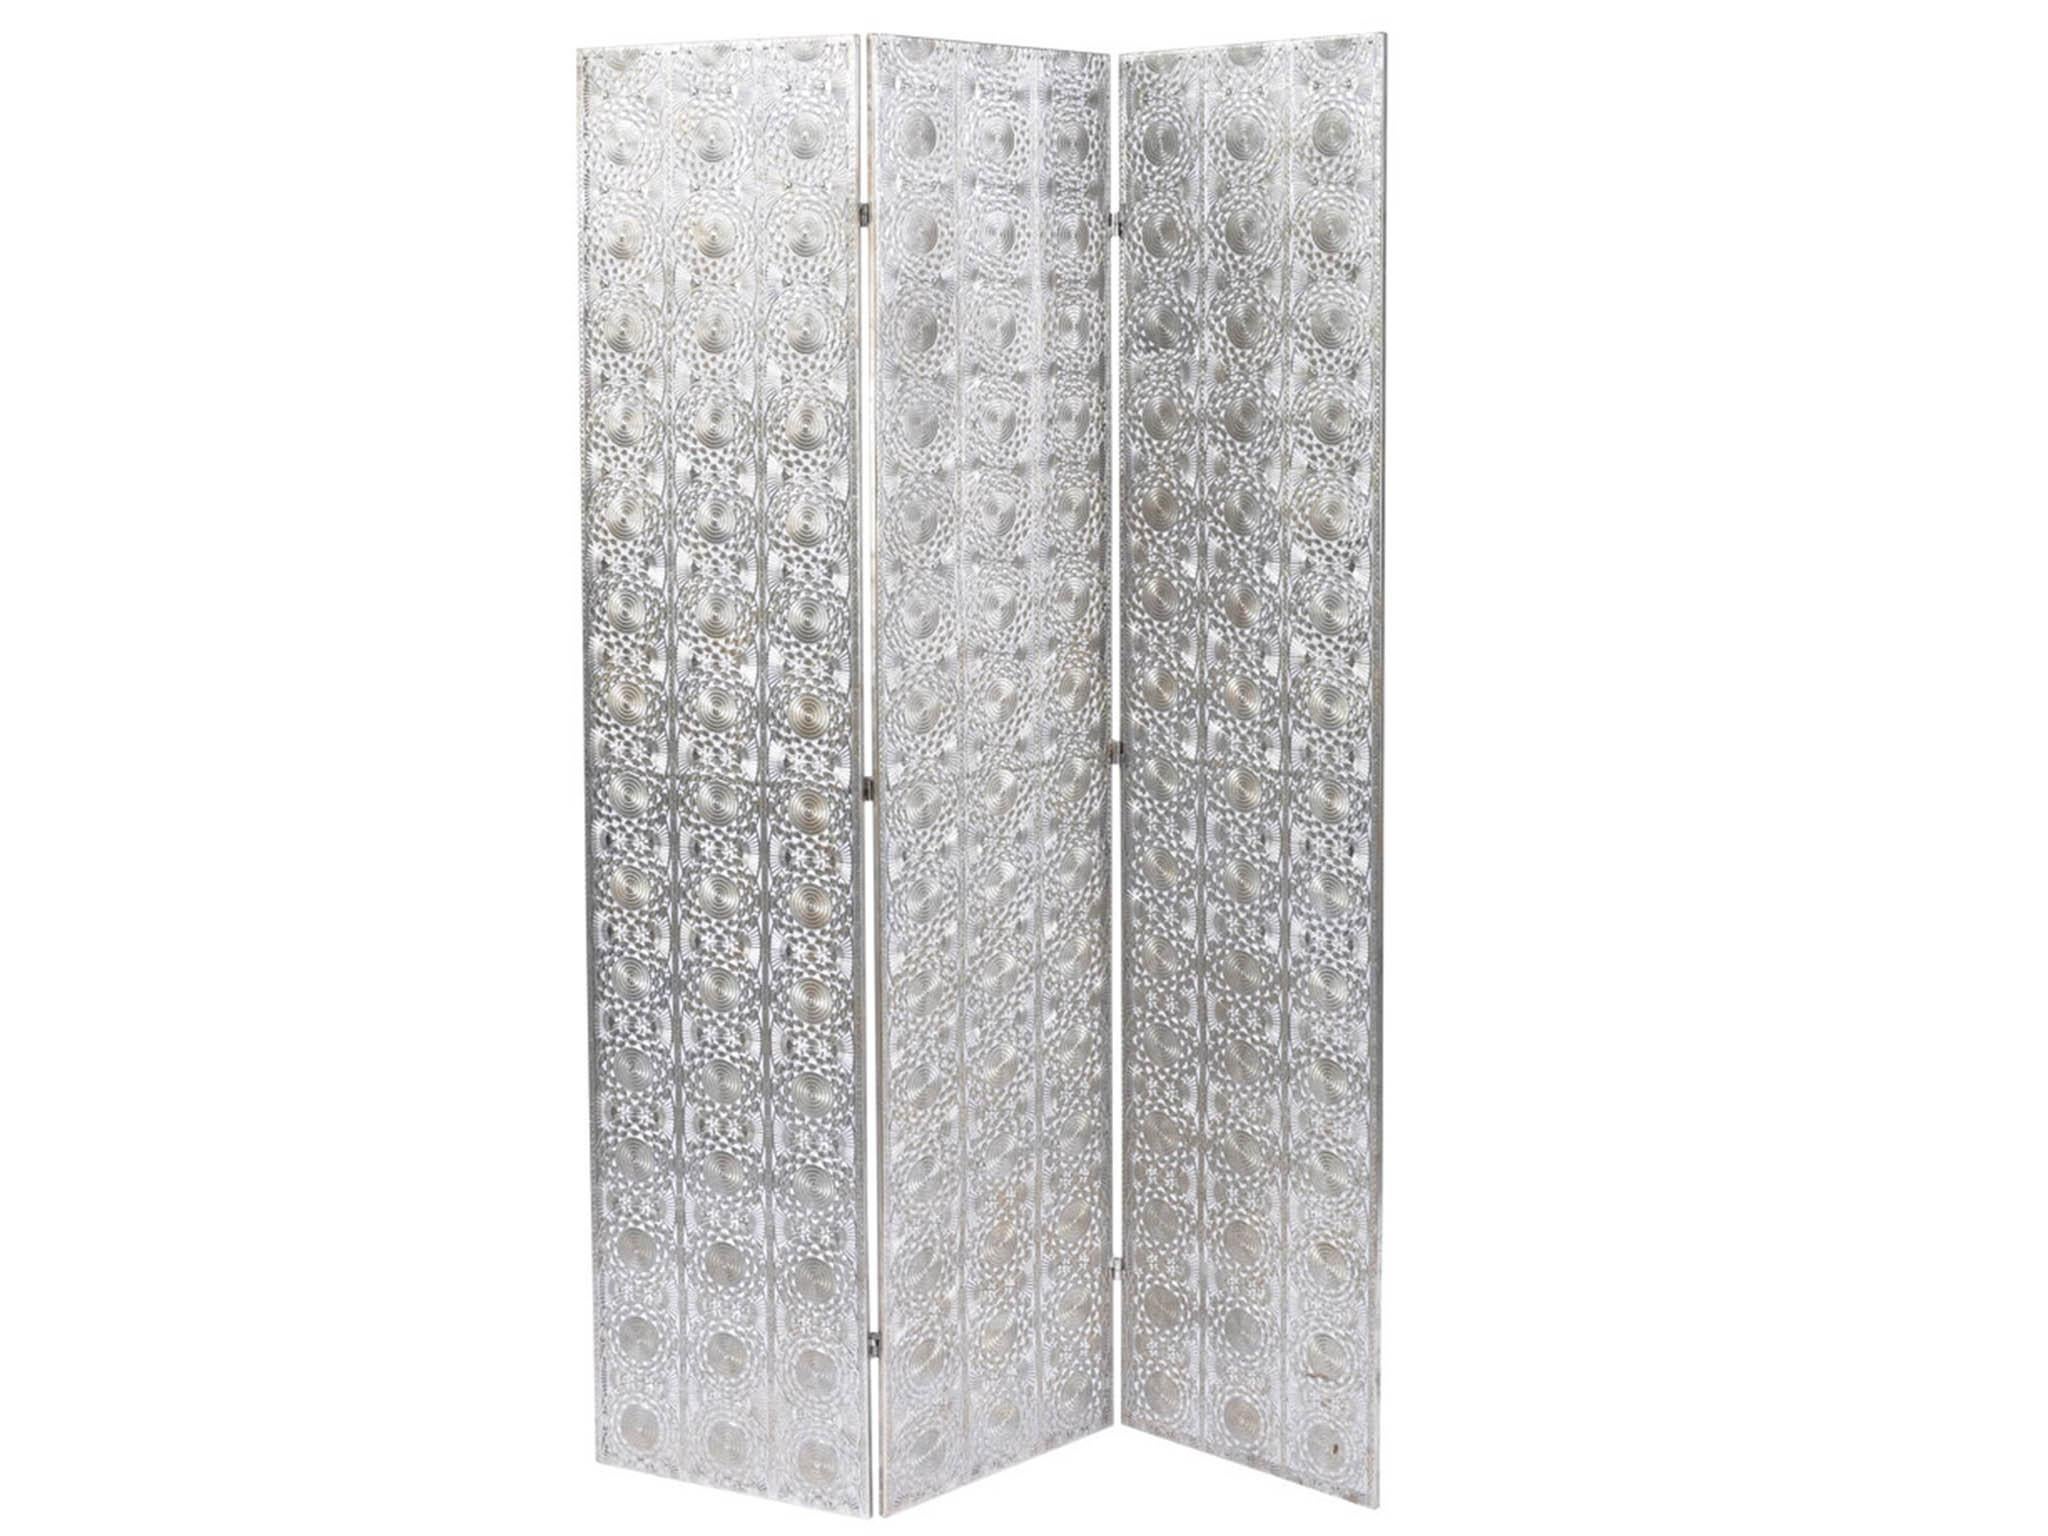 10 Best Room Dividers The Independent